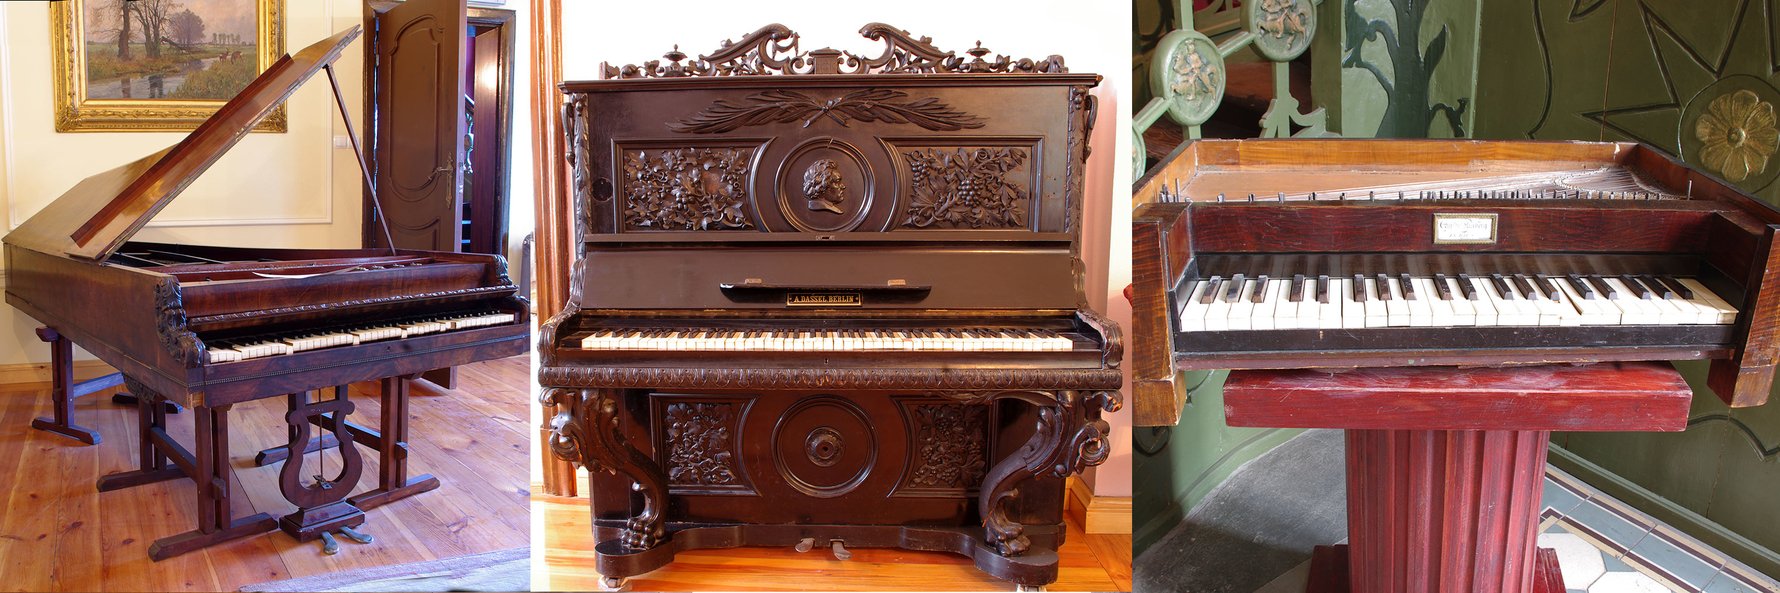 Piano Collection in Ostromecko Old Palace. Photos by Agnieszka M.